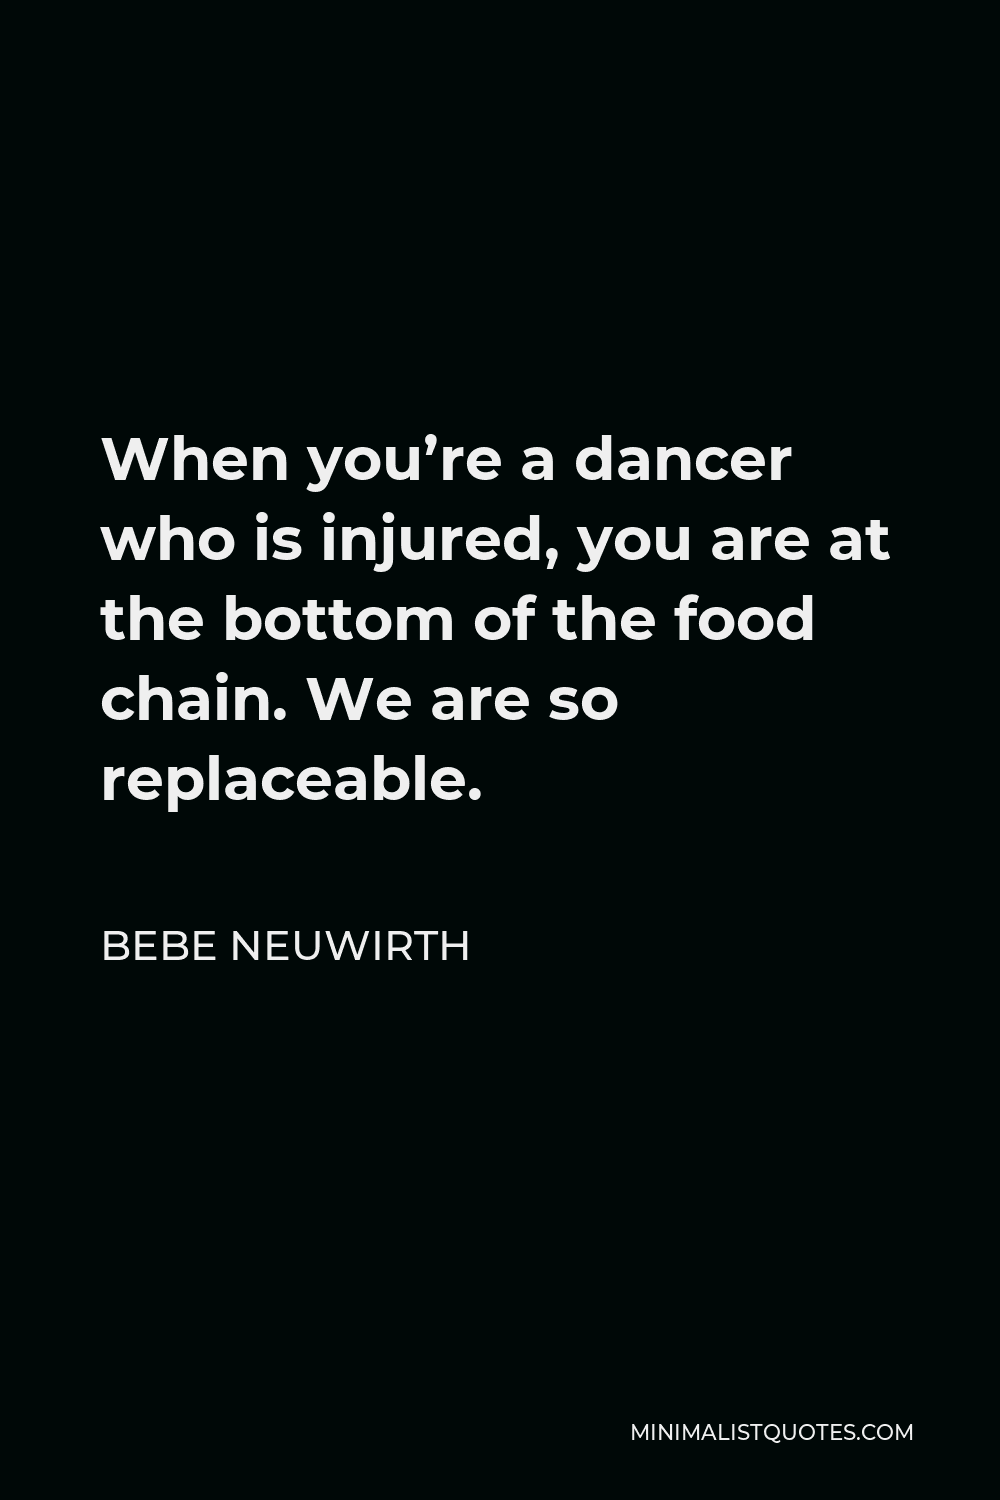 Bebe Neuwirth Quote - When you’re a dancer who is injured, you are at the bottom of the food chain. We are so replaceable.